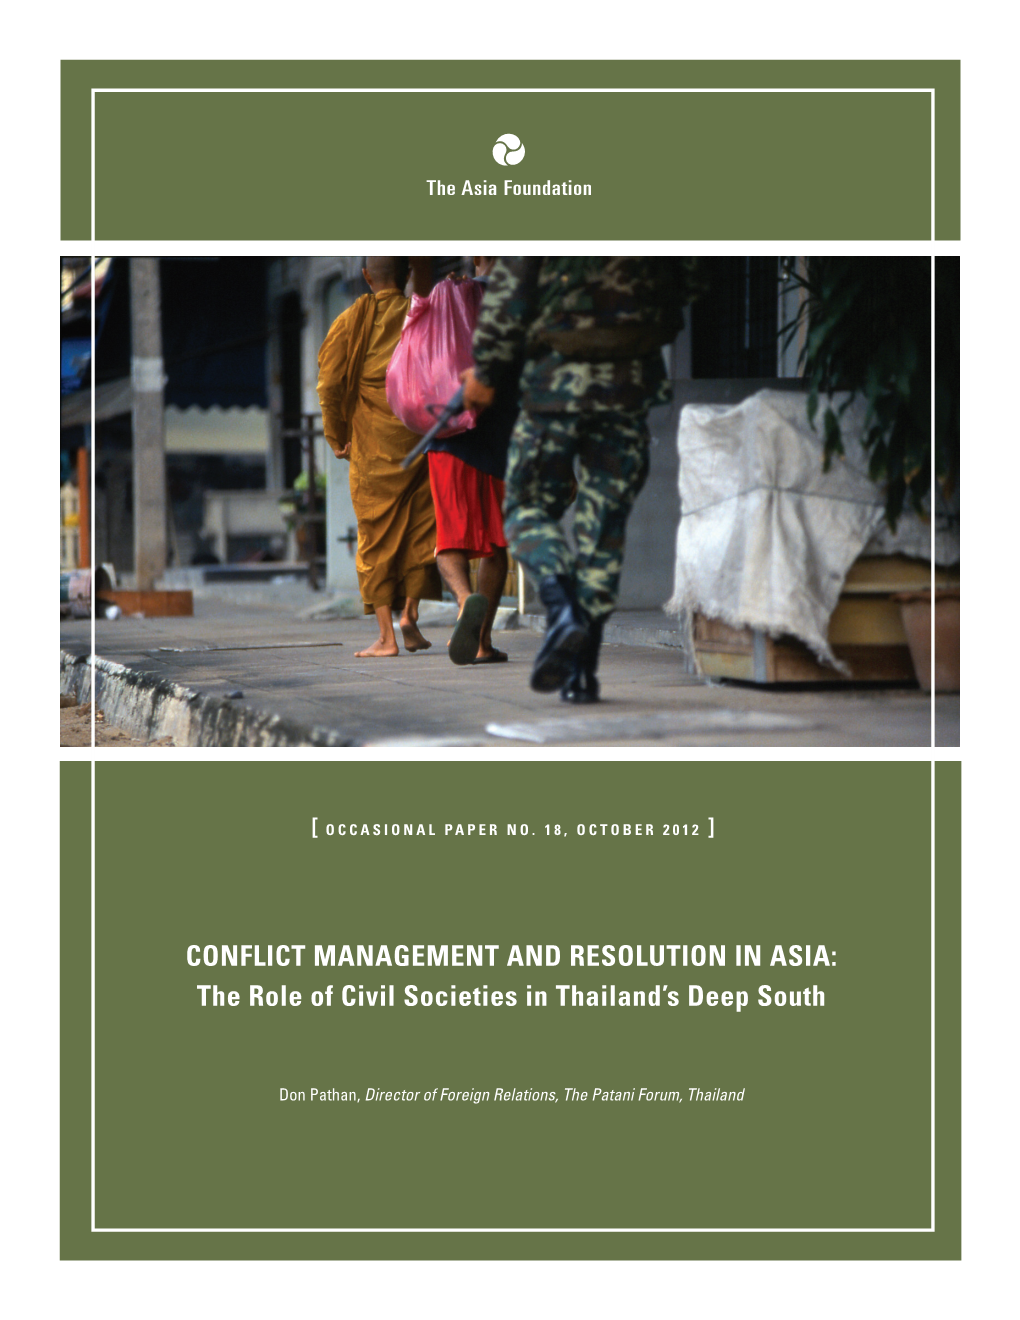 CONFLICT MANAGEMENT and RESOLUTION in ASIA: the Role of Civil Societies in Thailand's Deep South